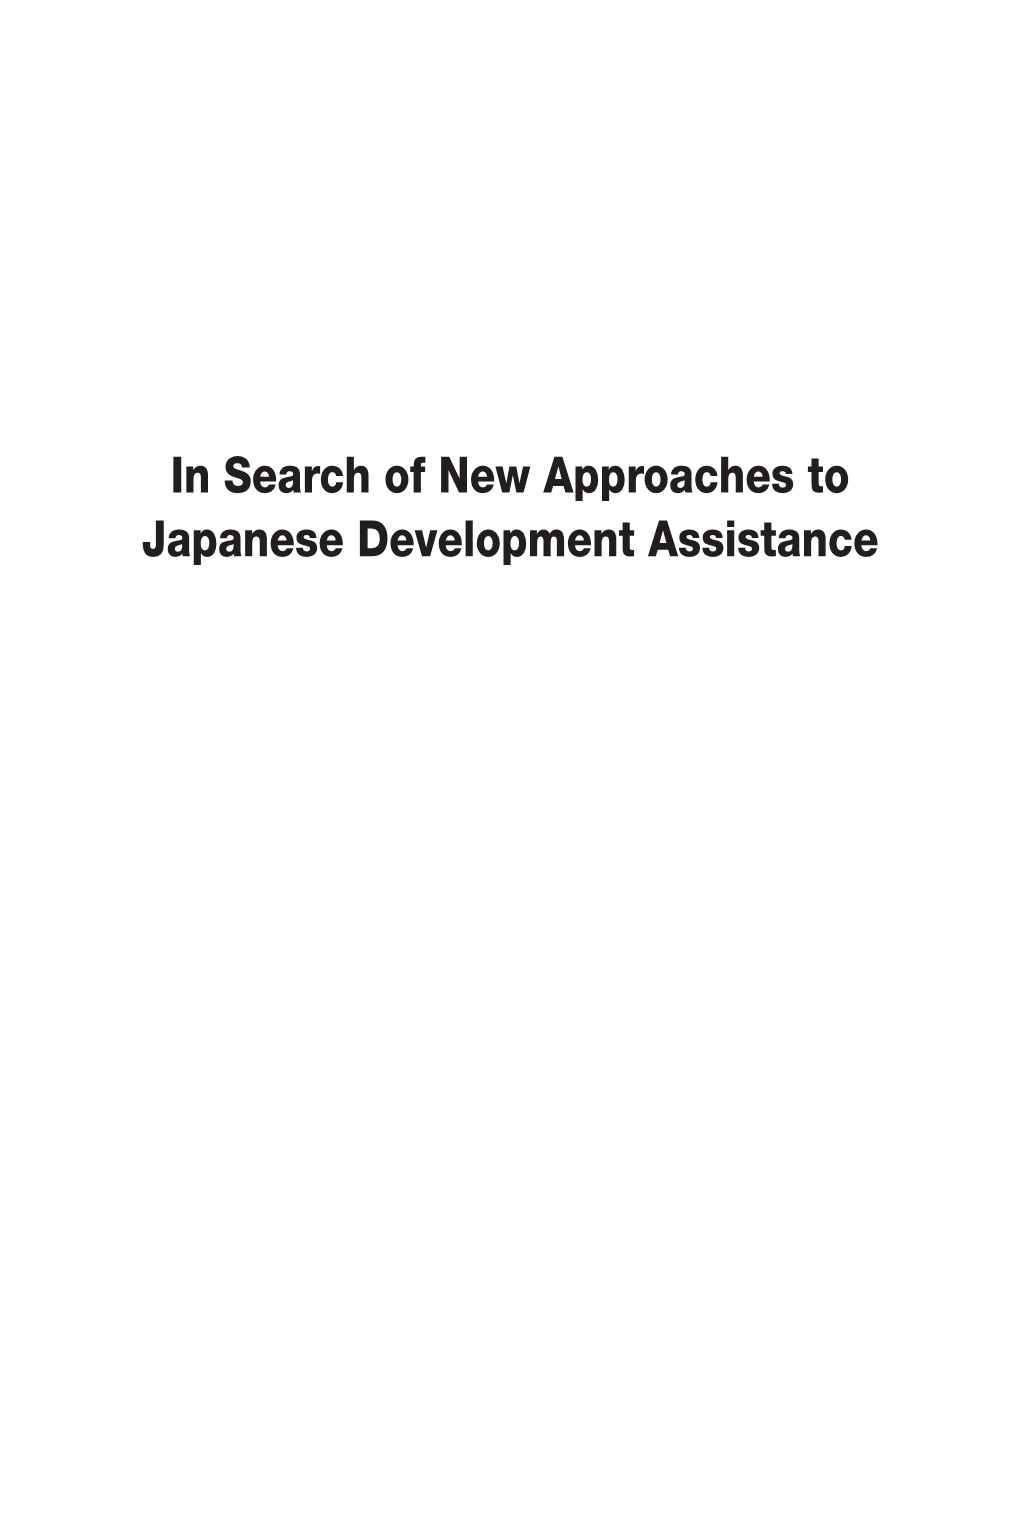 In Search of New Approaches to Japanese Development Assistance the Foundation for Advanced Studies on International Development (FASID) Was Established in April 1990